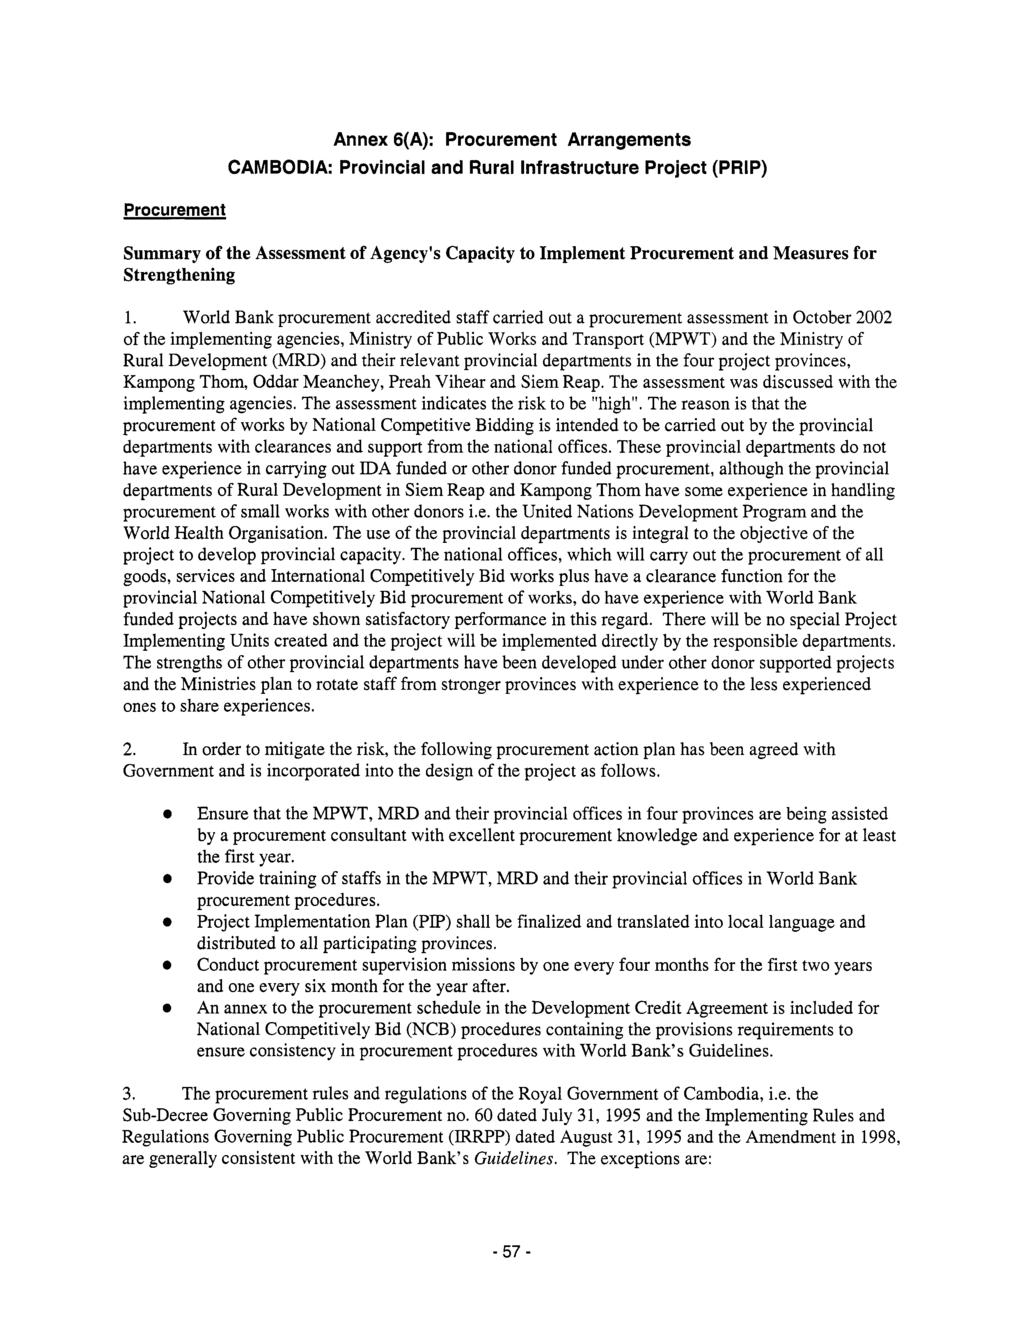 Procurement Annex 6(A): Procurement Arrangements CAMBODIA: Provincial and Rural Infrastructure Project (PRIP) Summary of the Assessment of Agency's Capacity to Implement Procurement and Measures for